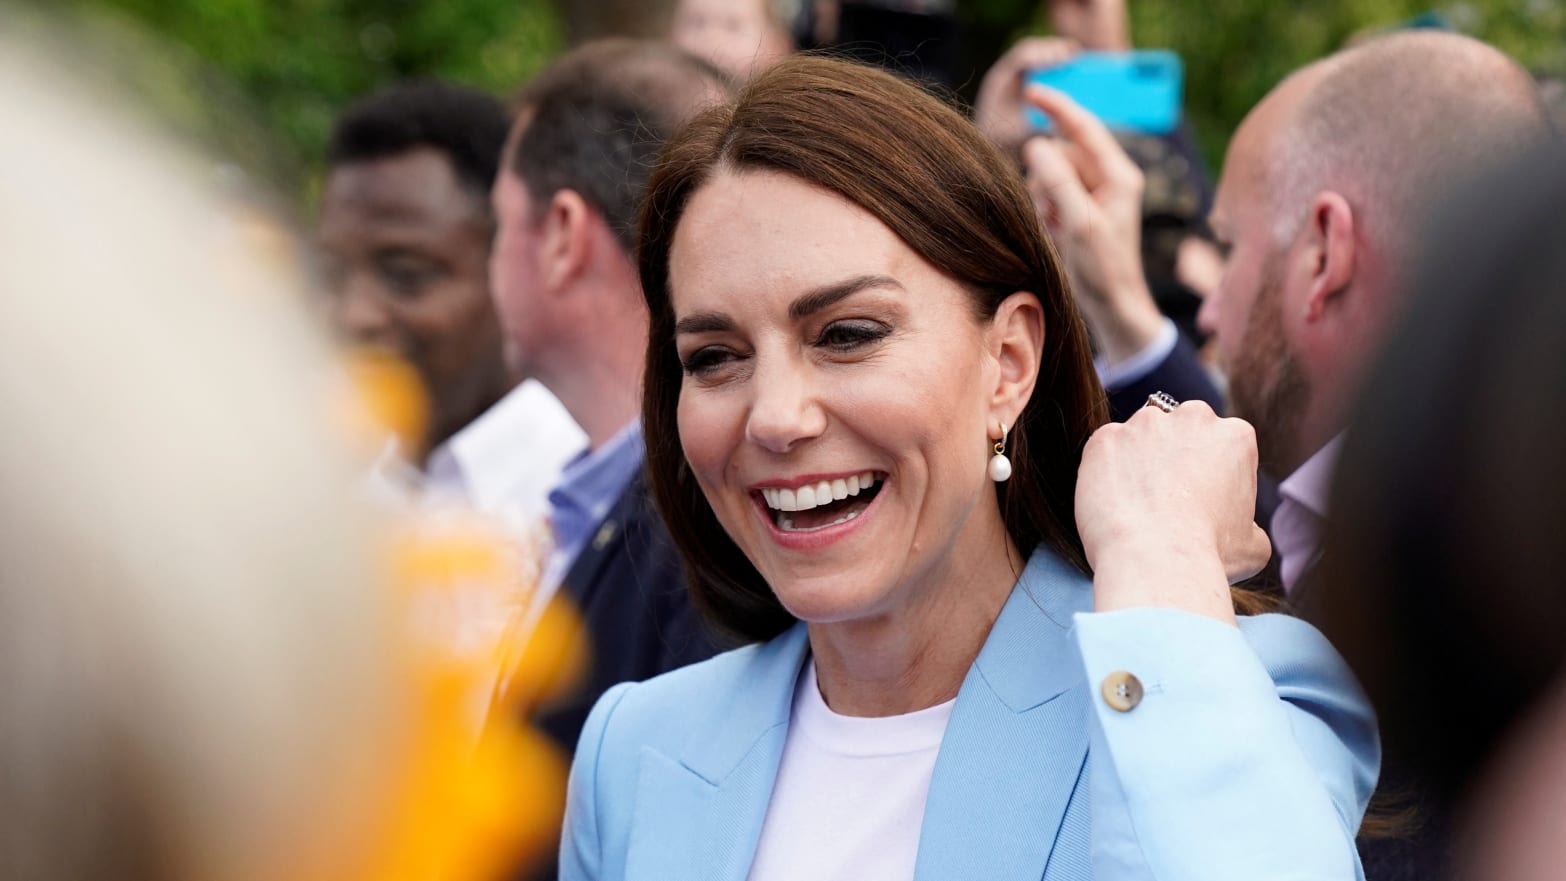 Kate during a walkabout meeting members of the public on the Long Walk near Windsor Castle